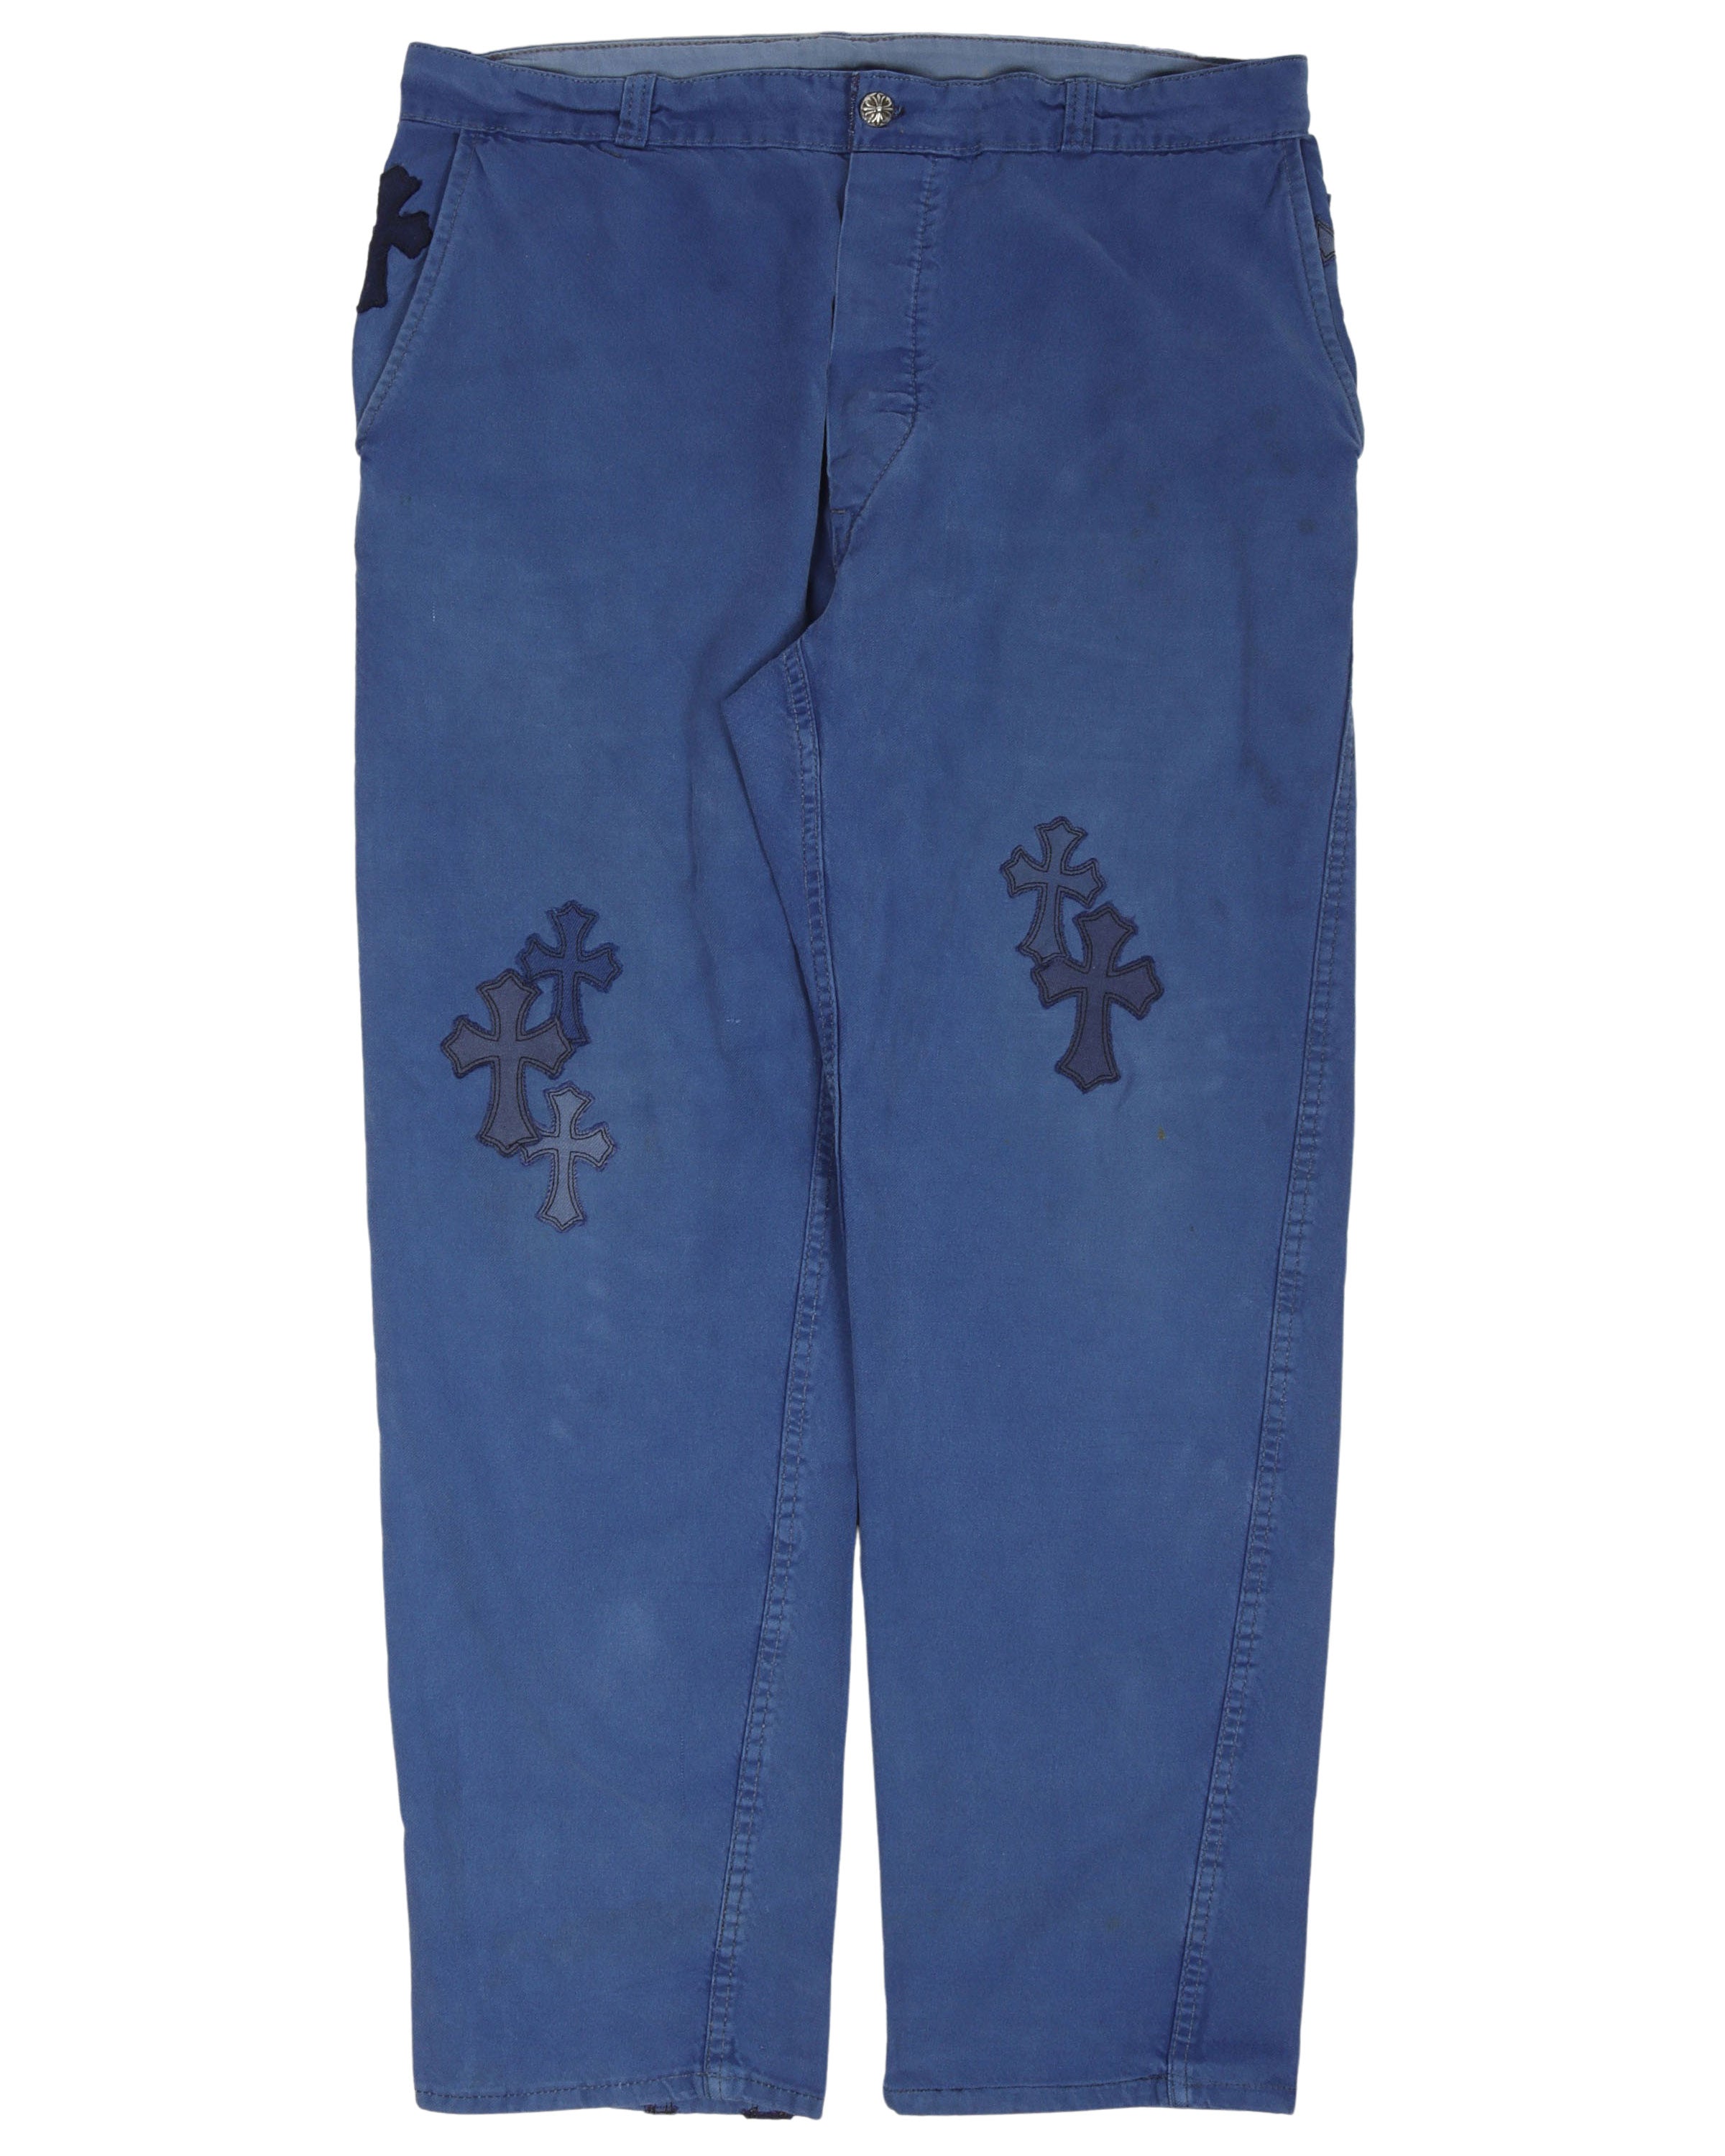 Chrome Hearts Cross Patch French Work Pants